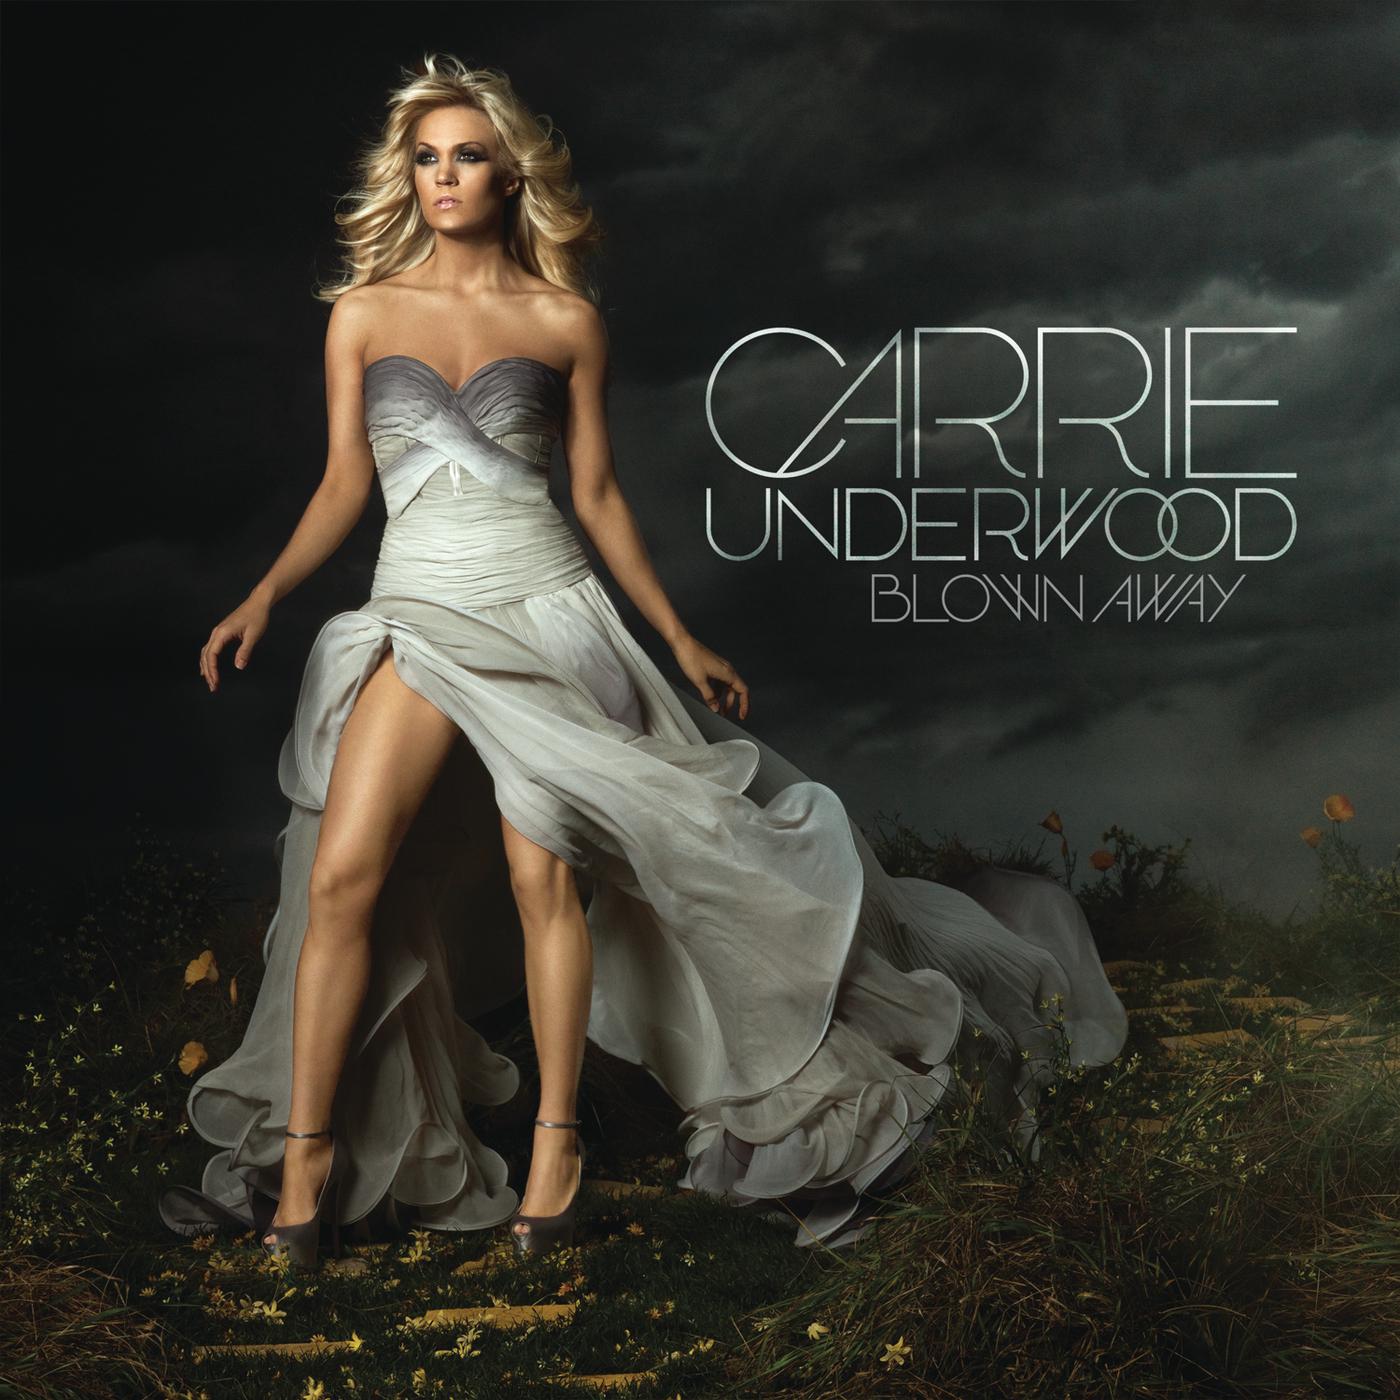 Carrie Underwood - Nobody Ever Told You